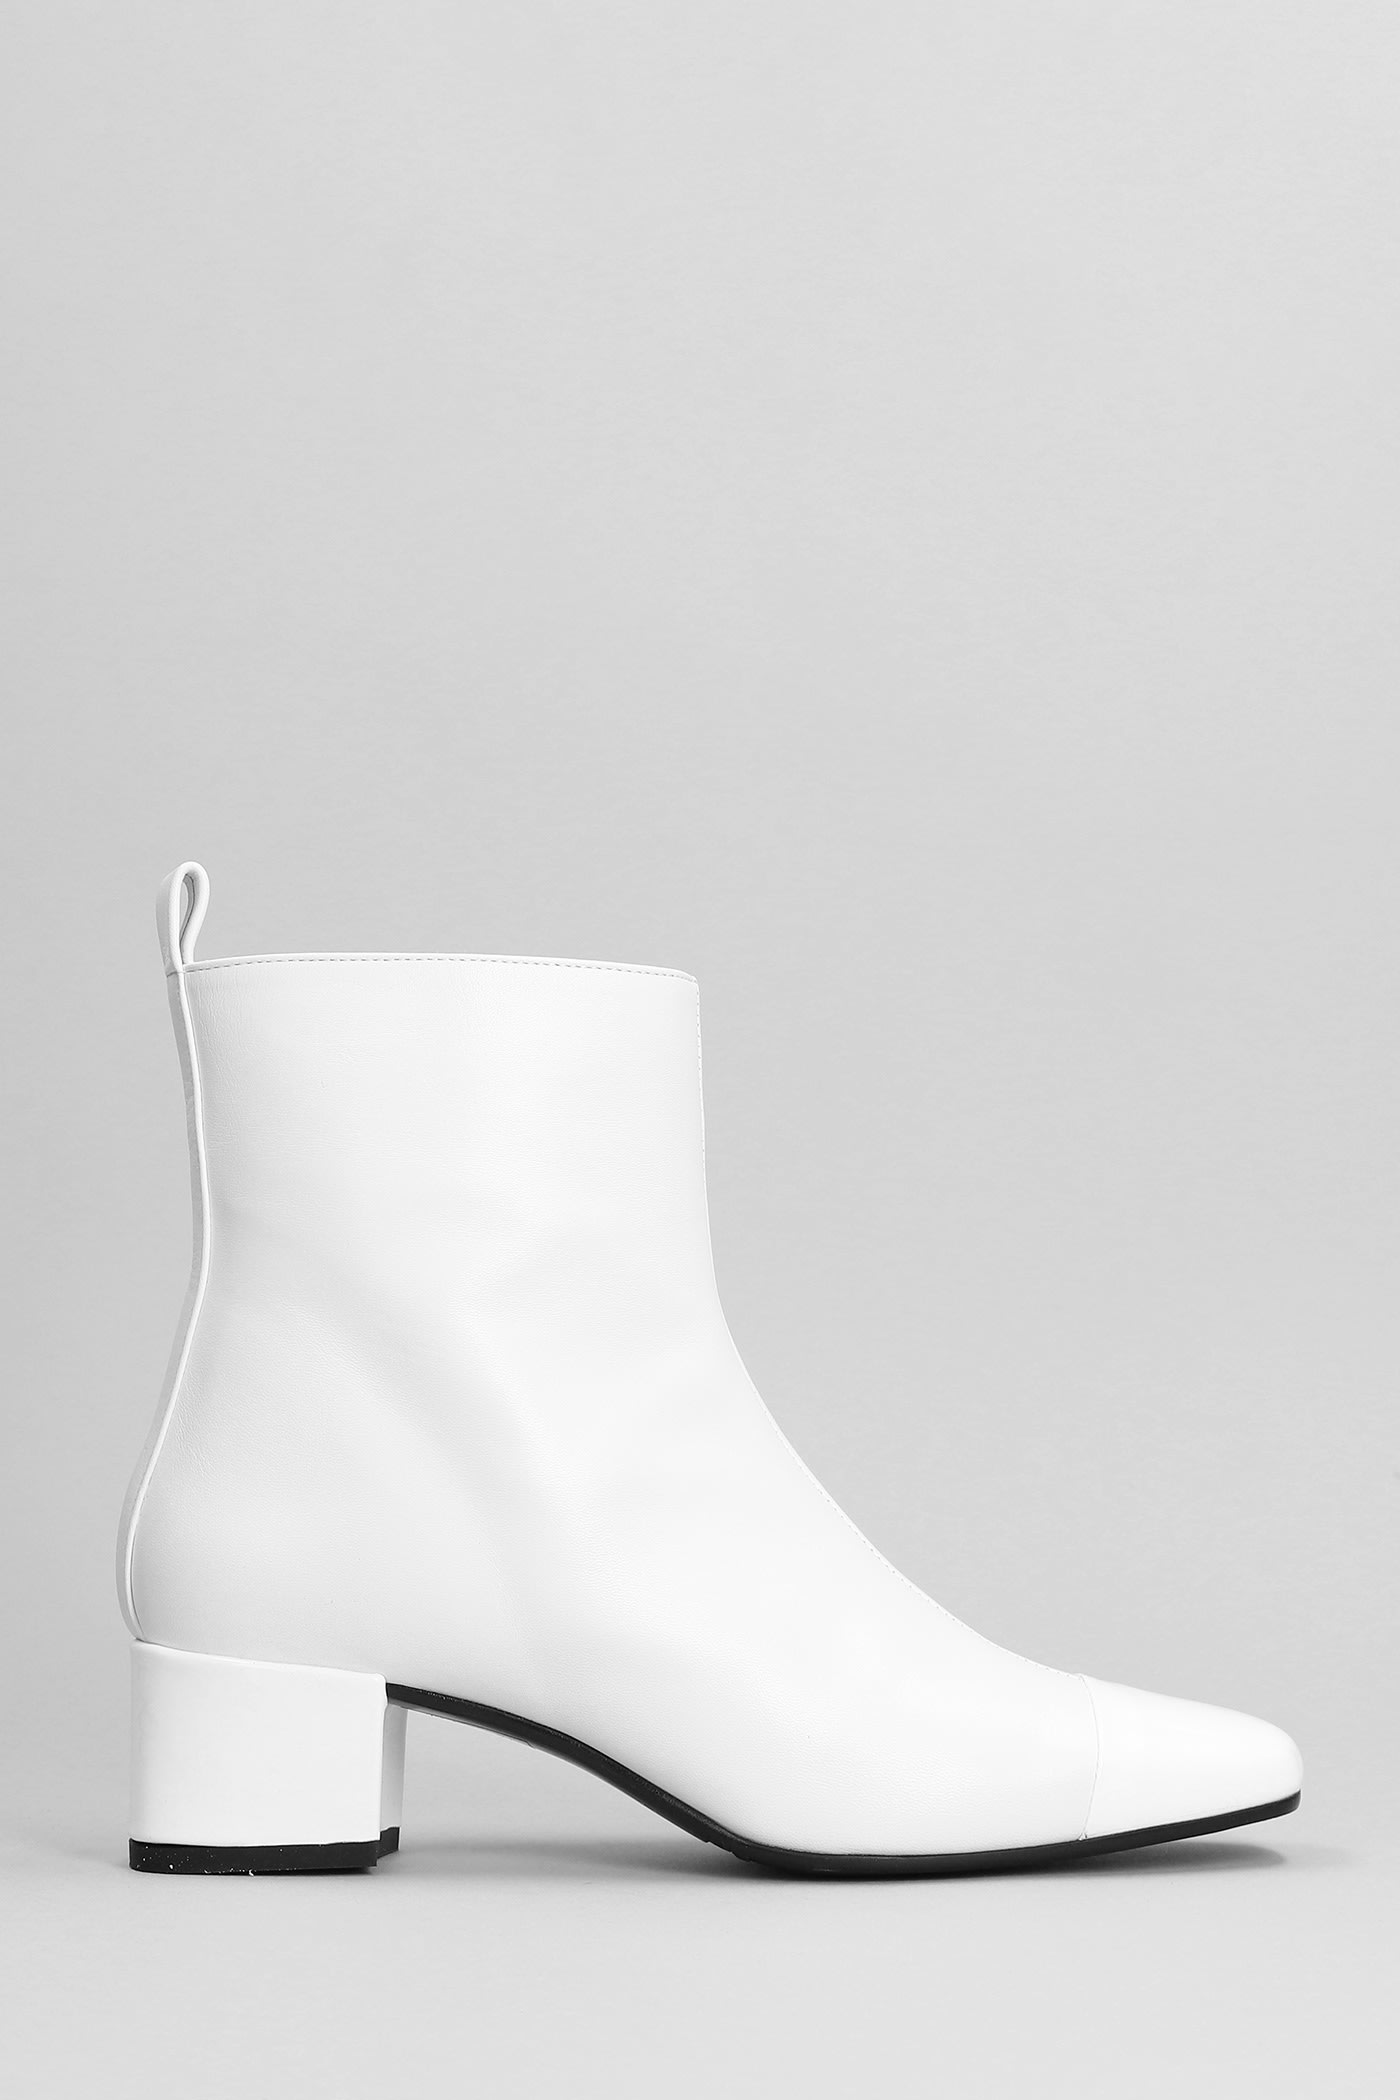 Carel Estime Bis Low Heels Ankle Boots In White Leather